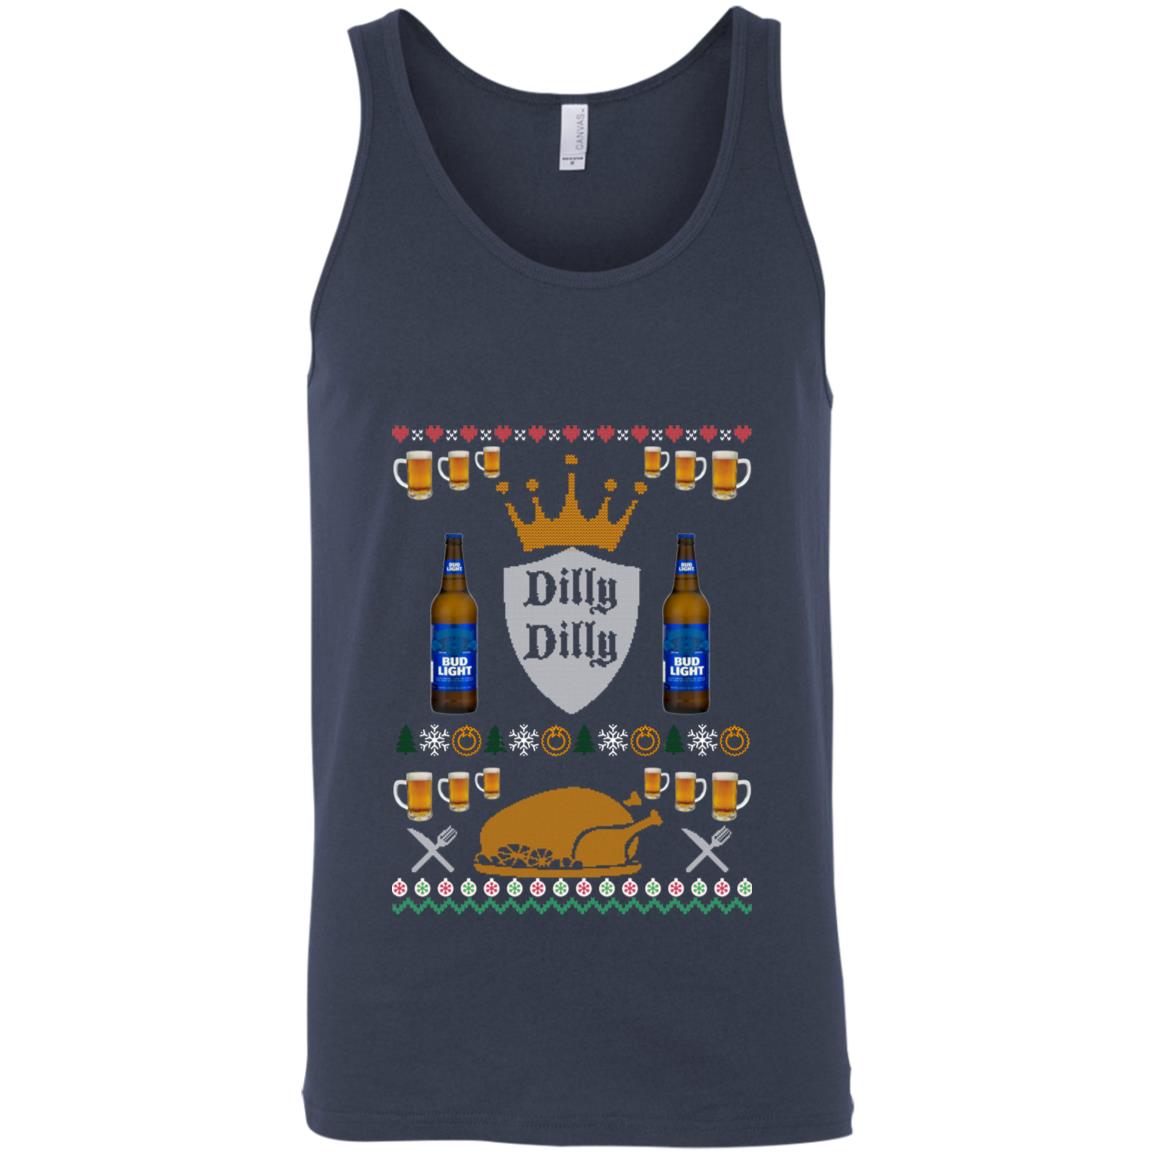 Bud Light Dilly Dilly Ugly Christmas Sweater, Hoodie